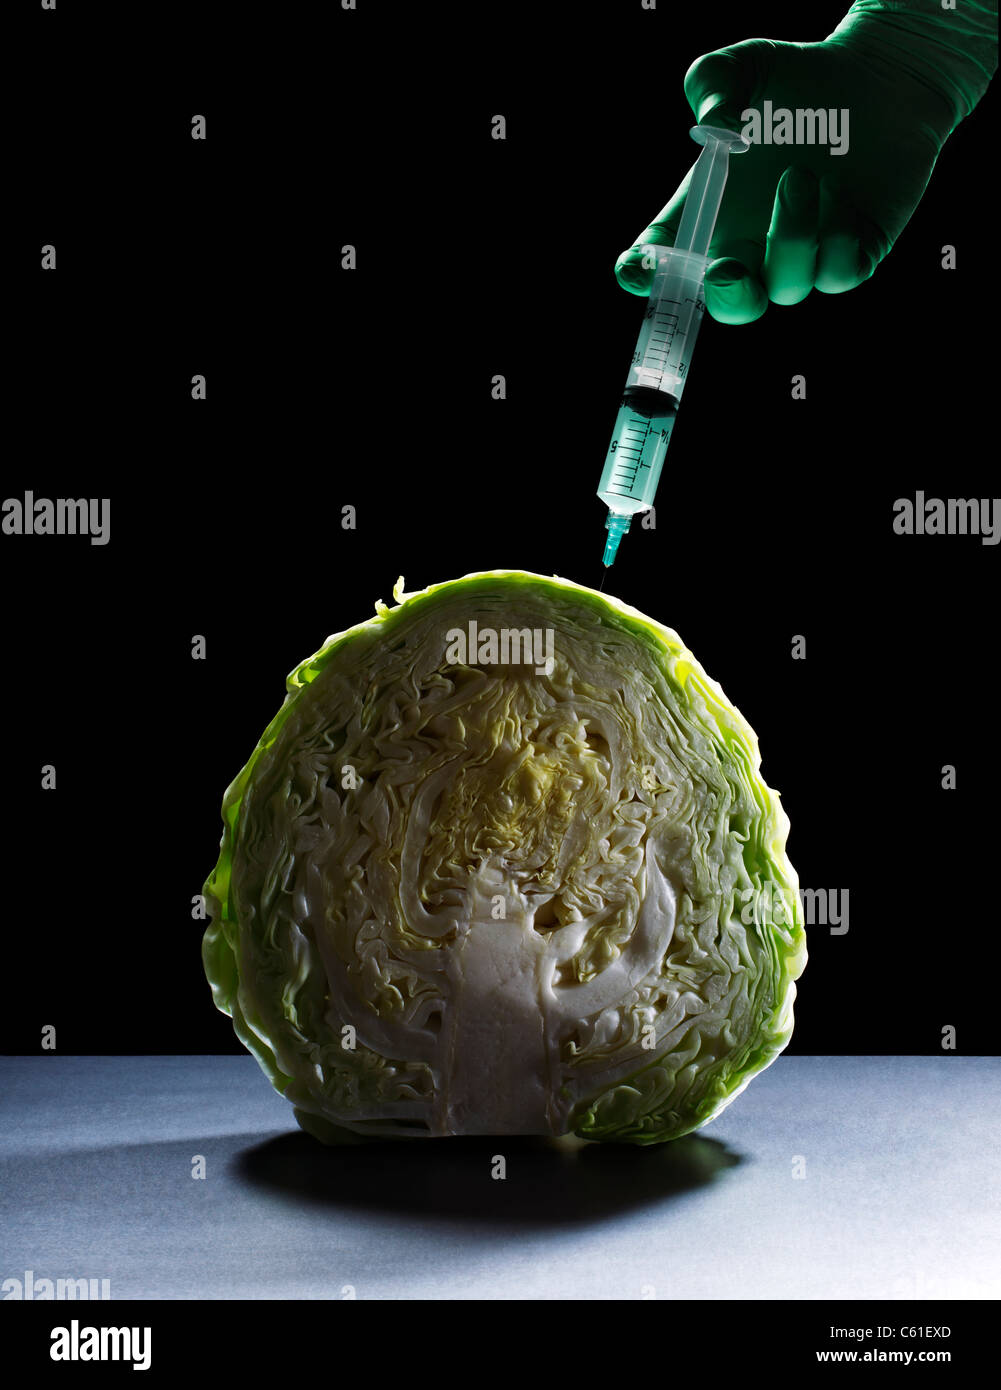 Cabbage with Hypodermic Syringe Stock Photo